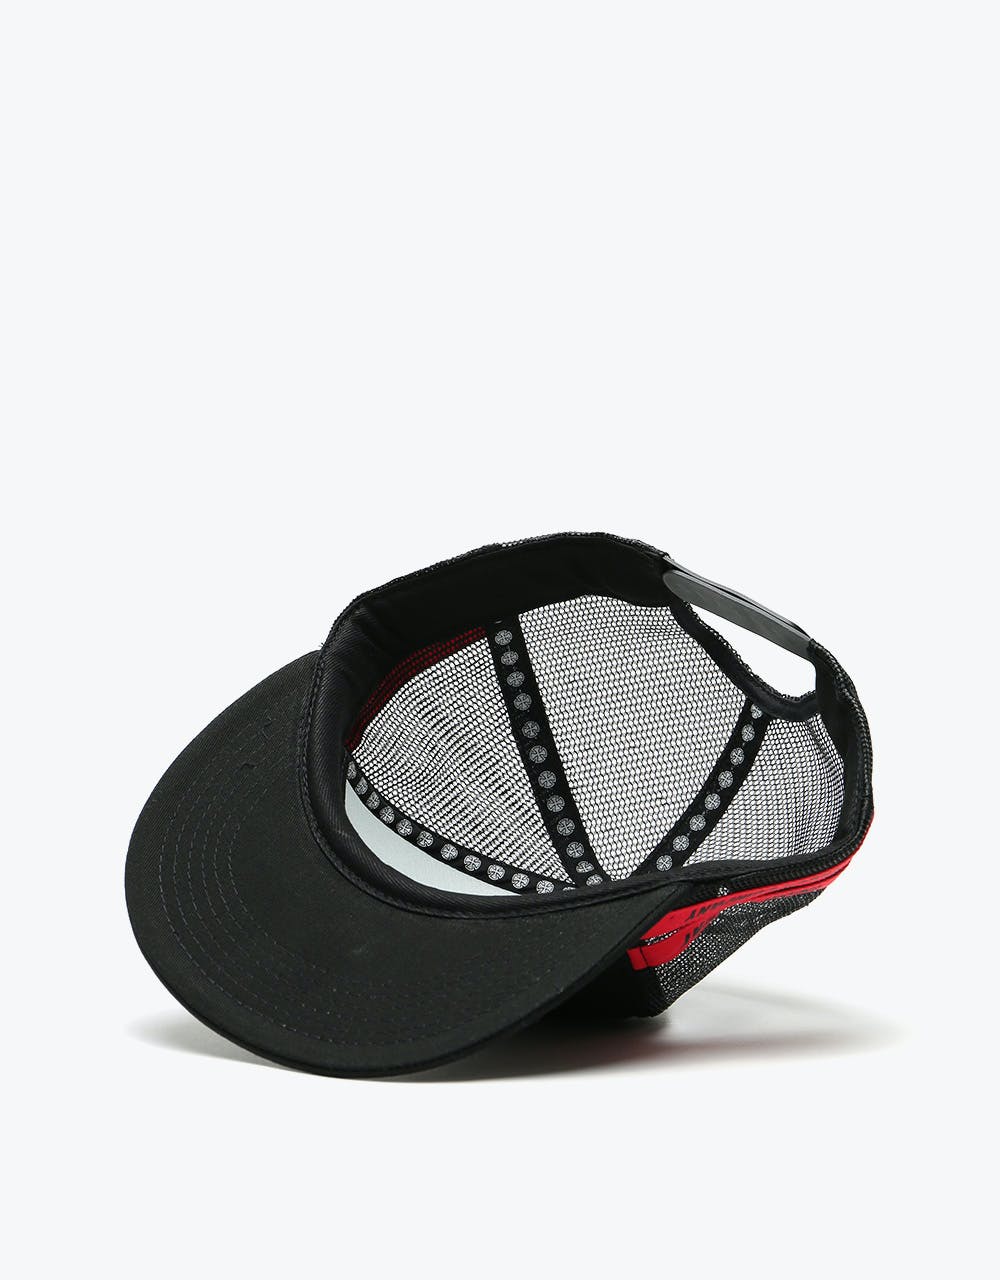 Independent Shear Mesh Cap - Black/Red